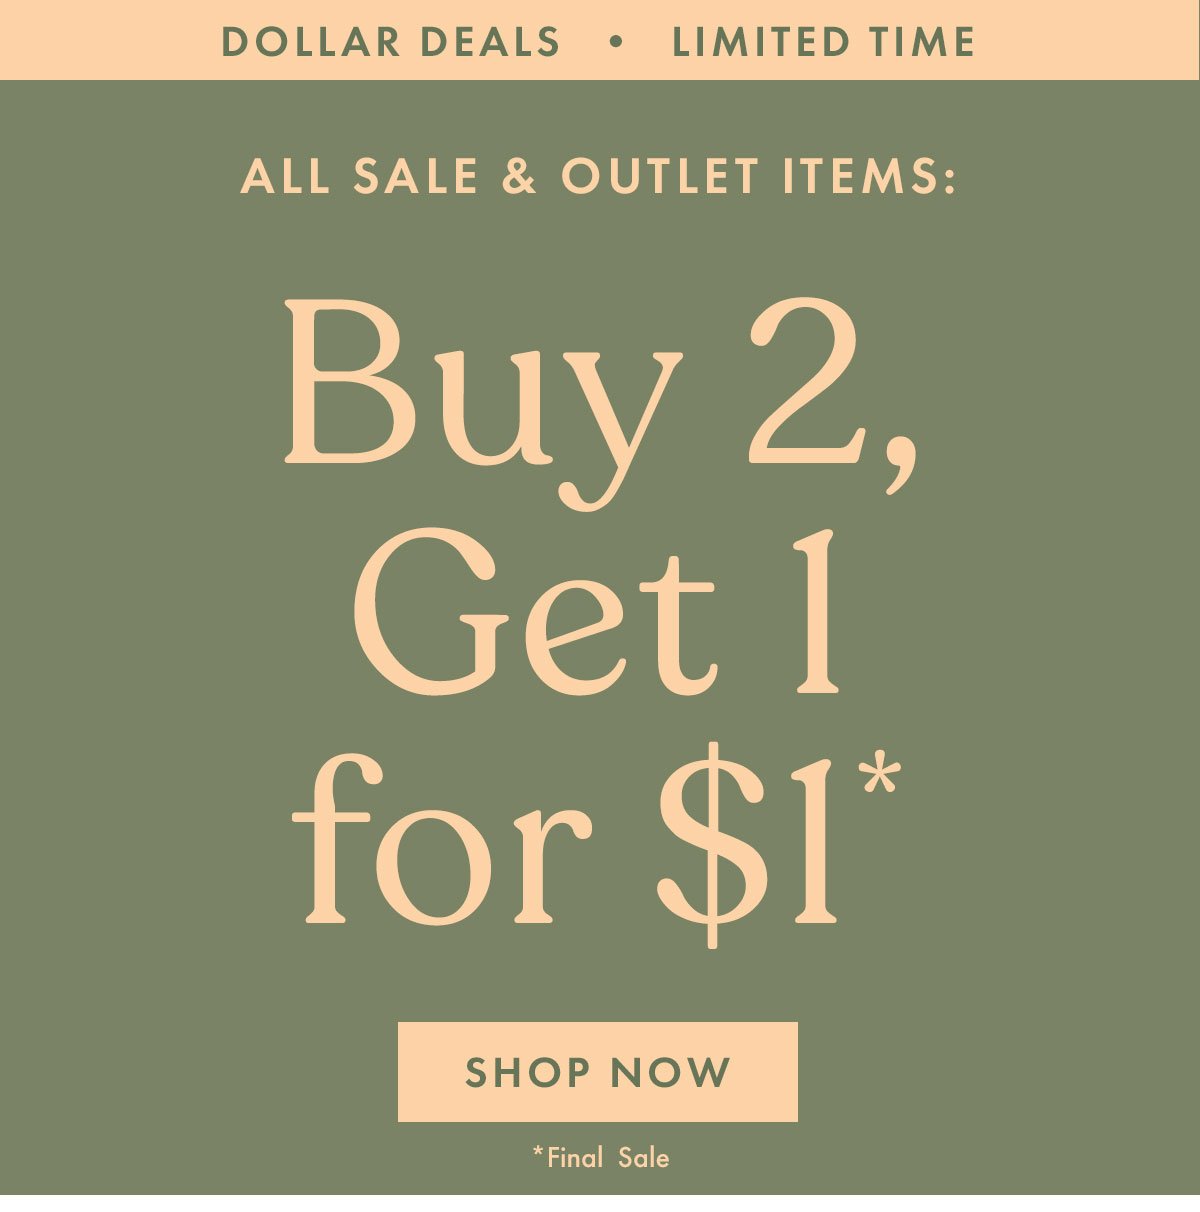 All Sale & Outlet Items: Buy 2, Get 1 for $1